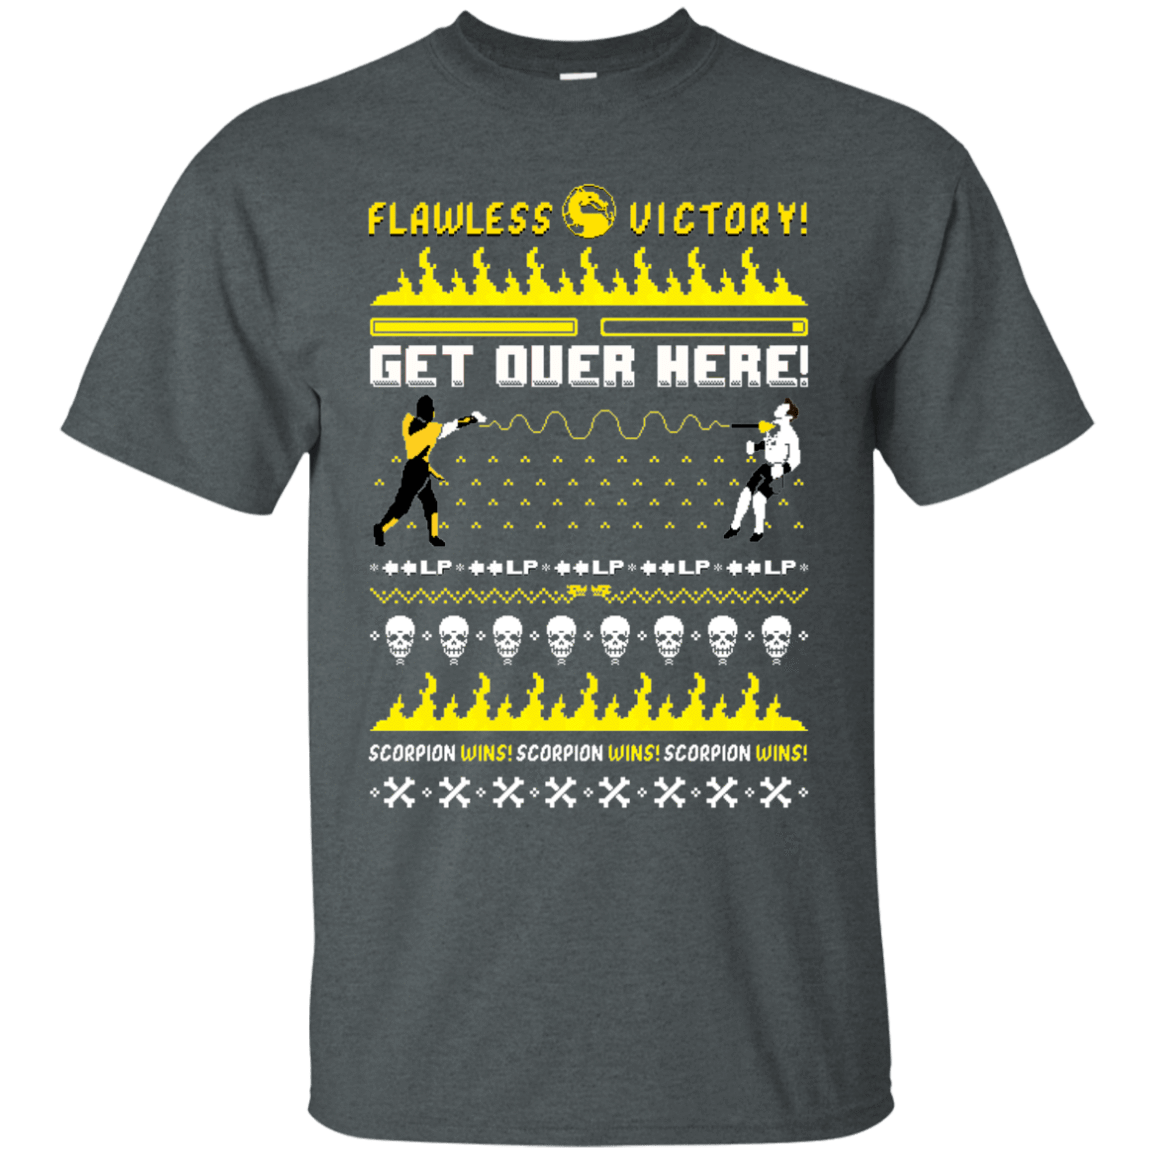 T-Shirts Dark Heather / Small Get Over Here Ugly Sweater T-Shirt